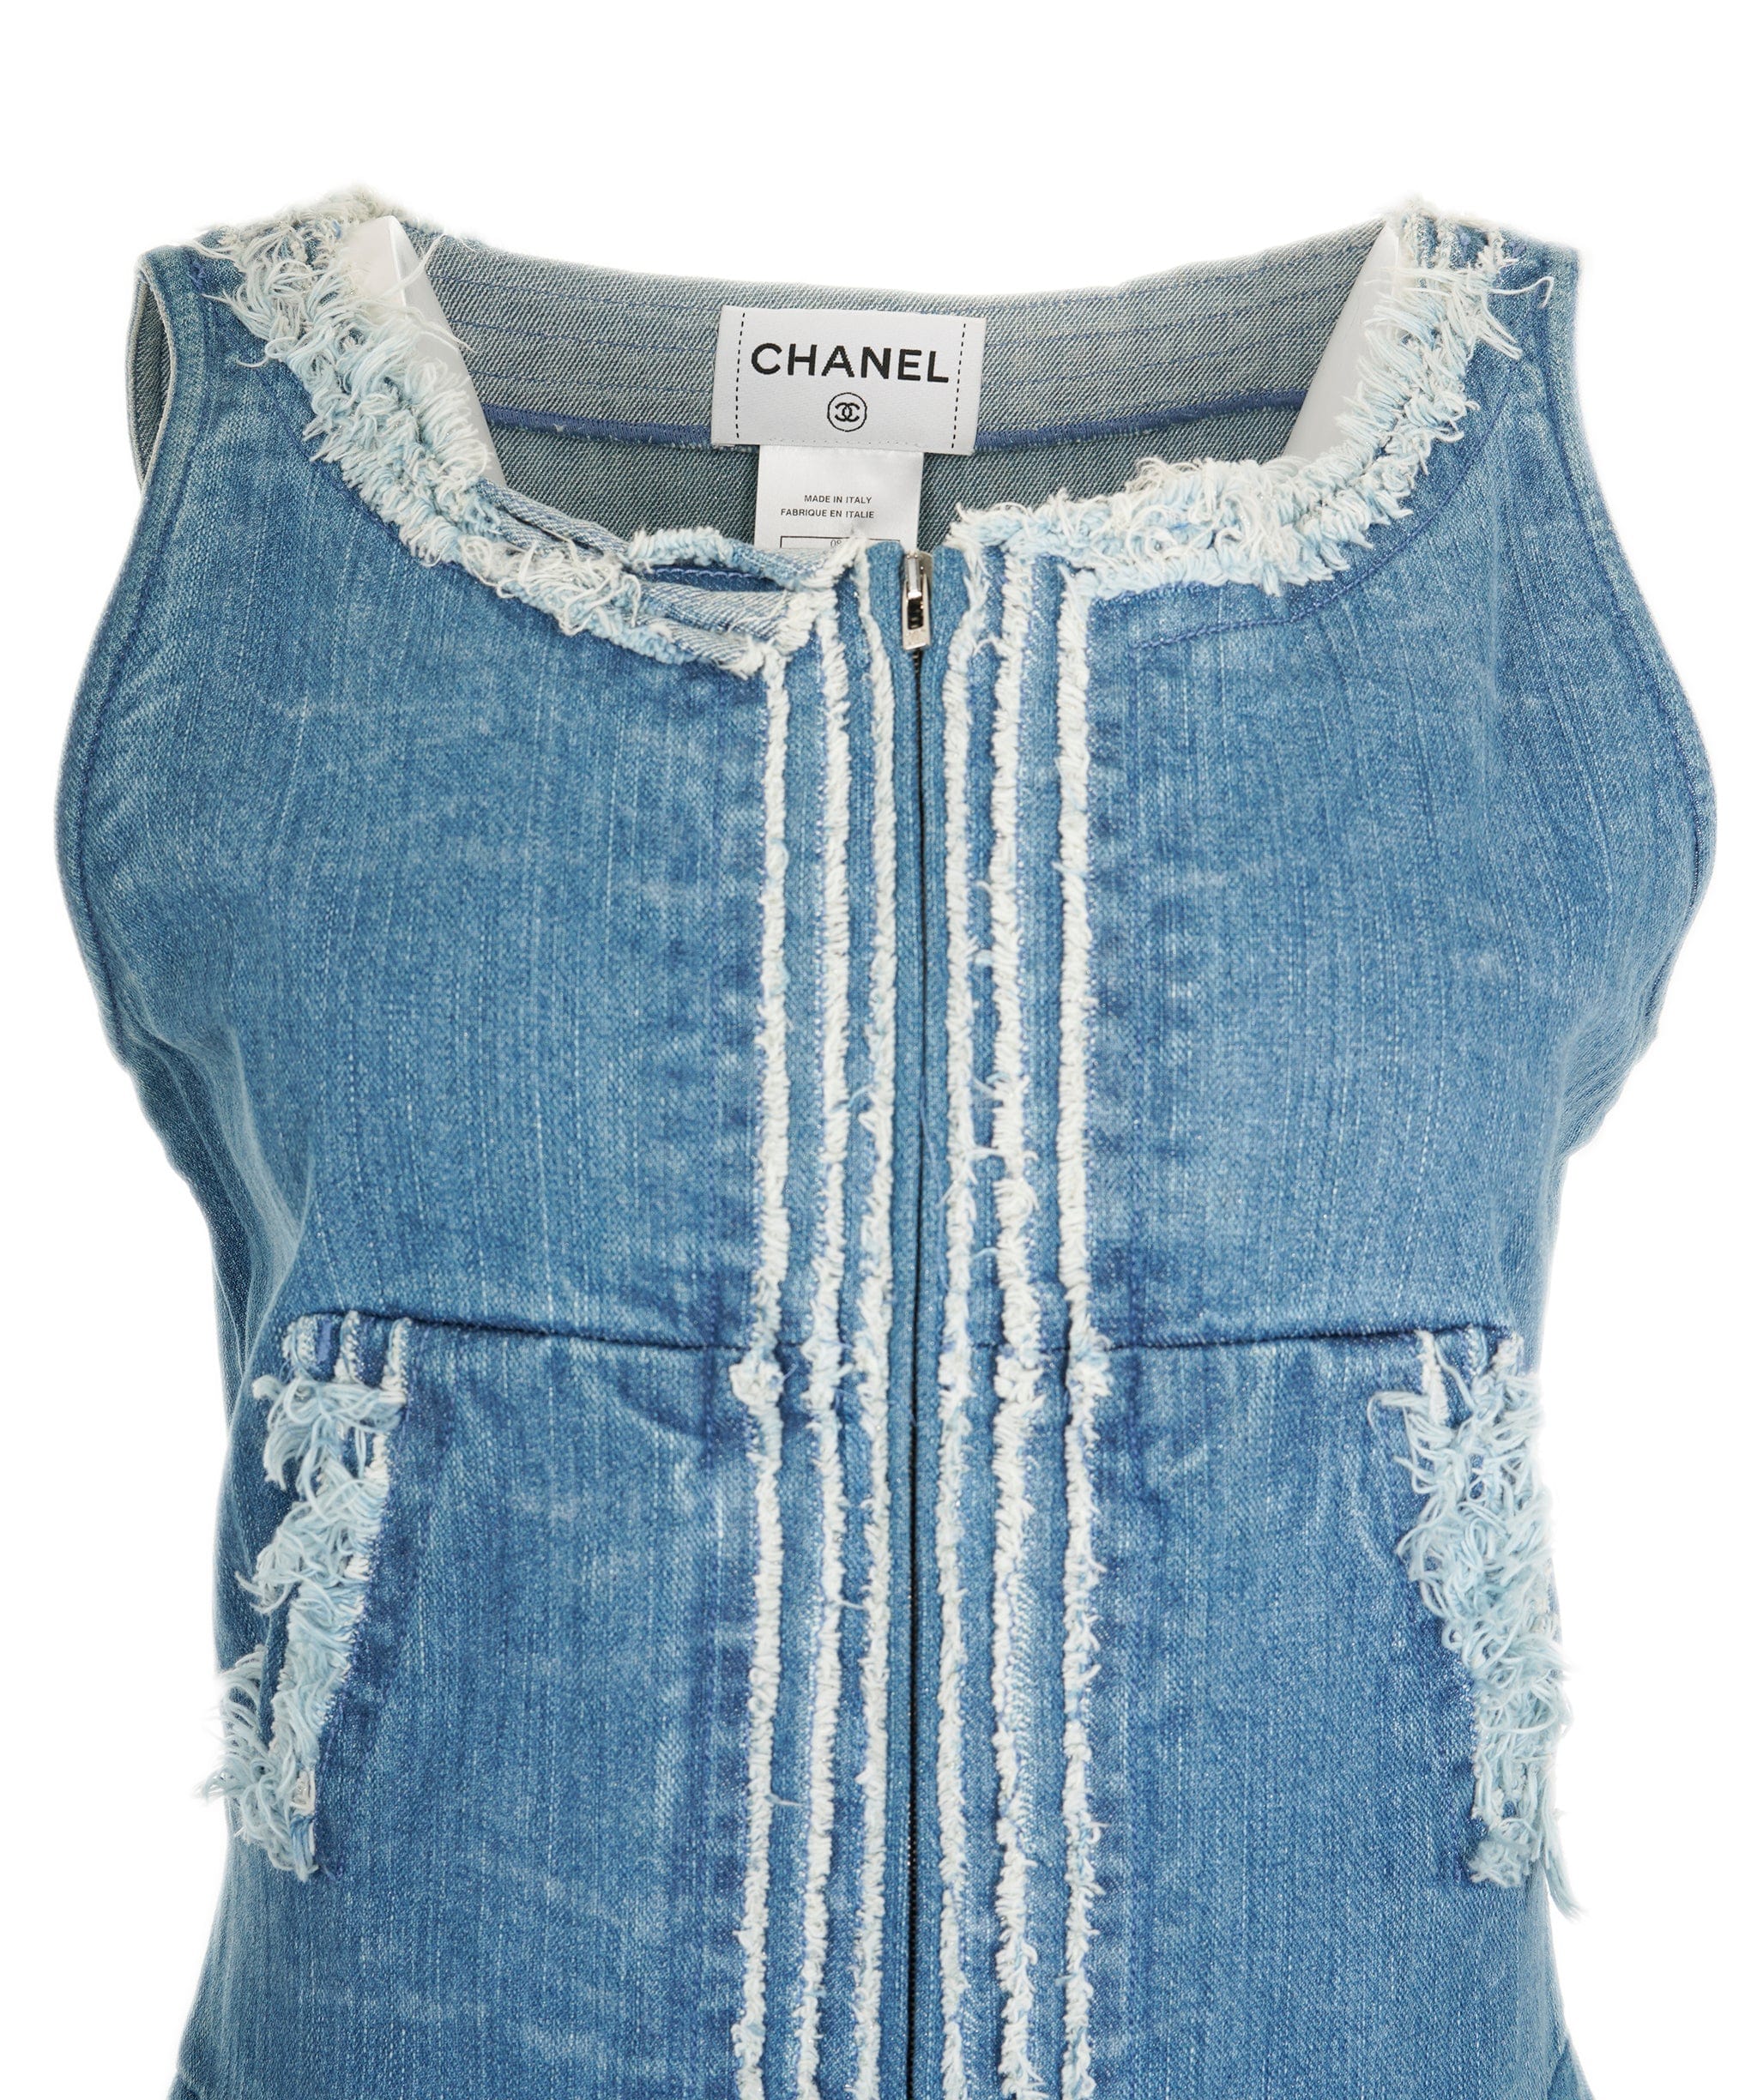 Chanel Chanel Denim Distressed Pinafore Dress with Zip Detail Size FR 40 (UK 12) ASL9296